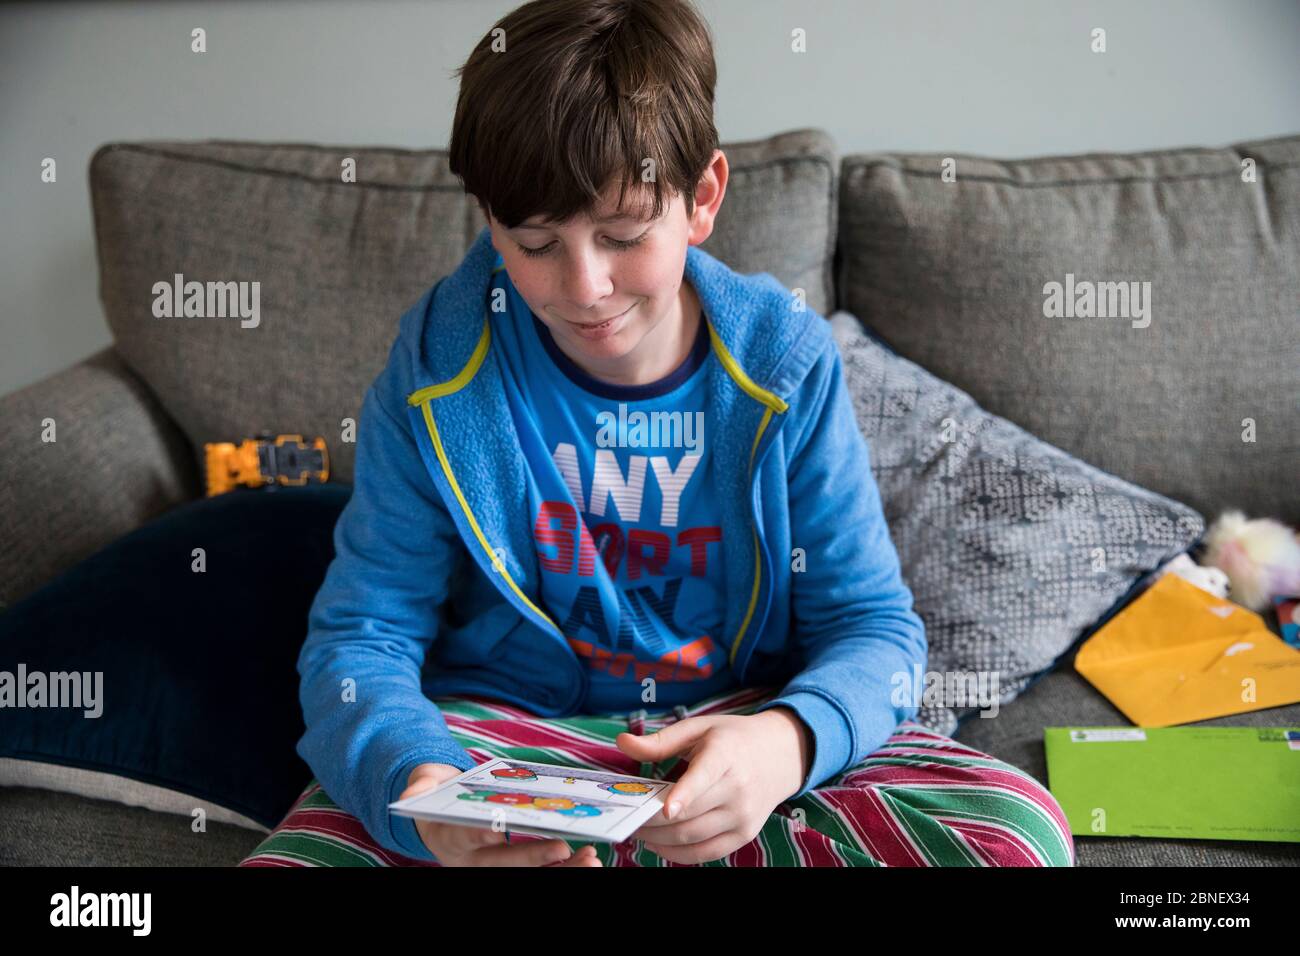 Smirking Teen Boy Reads birthday Card While Sitting on Couch in Pjs Stock Photo